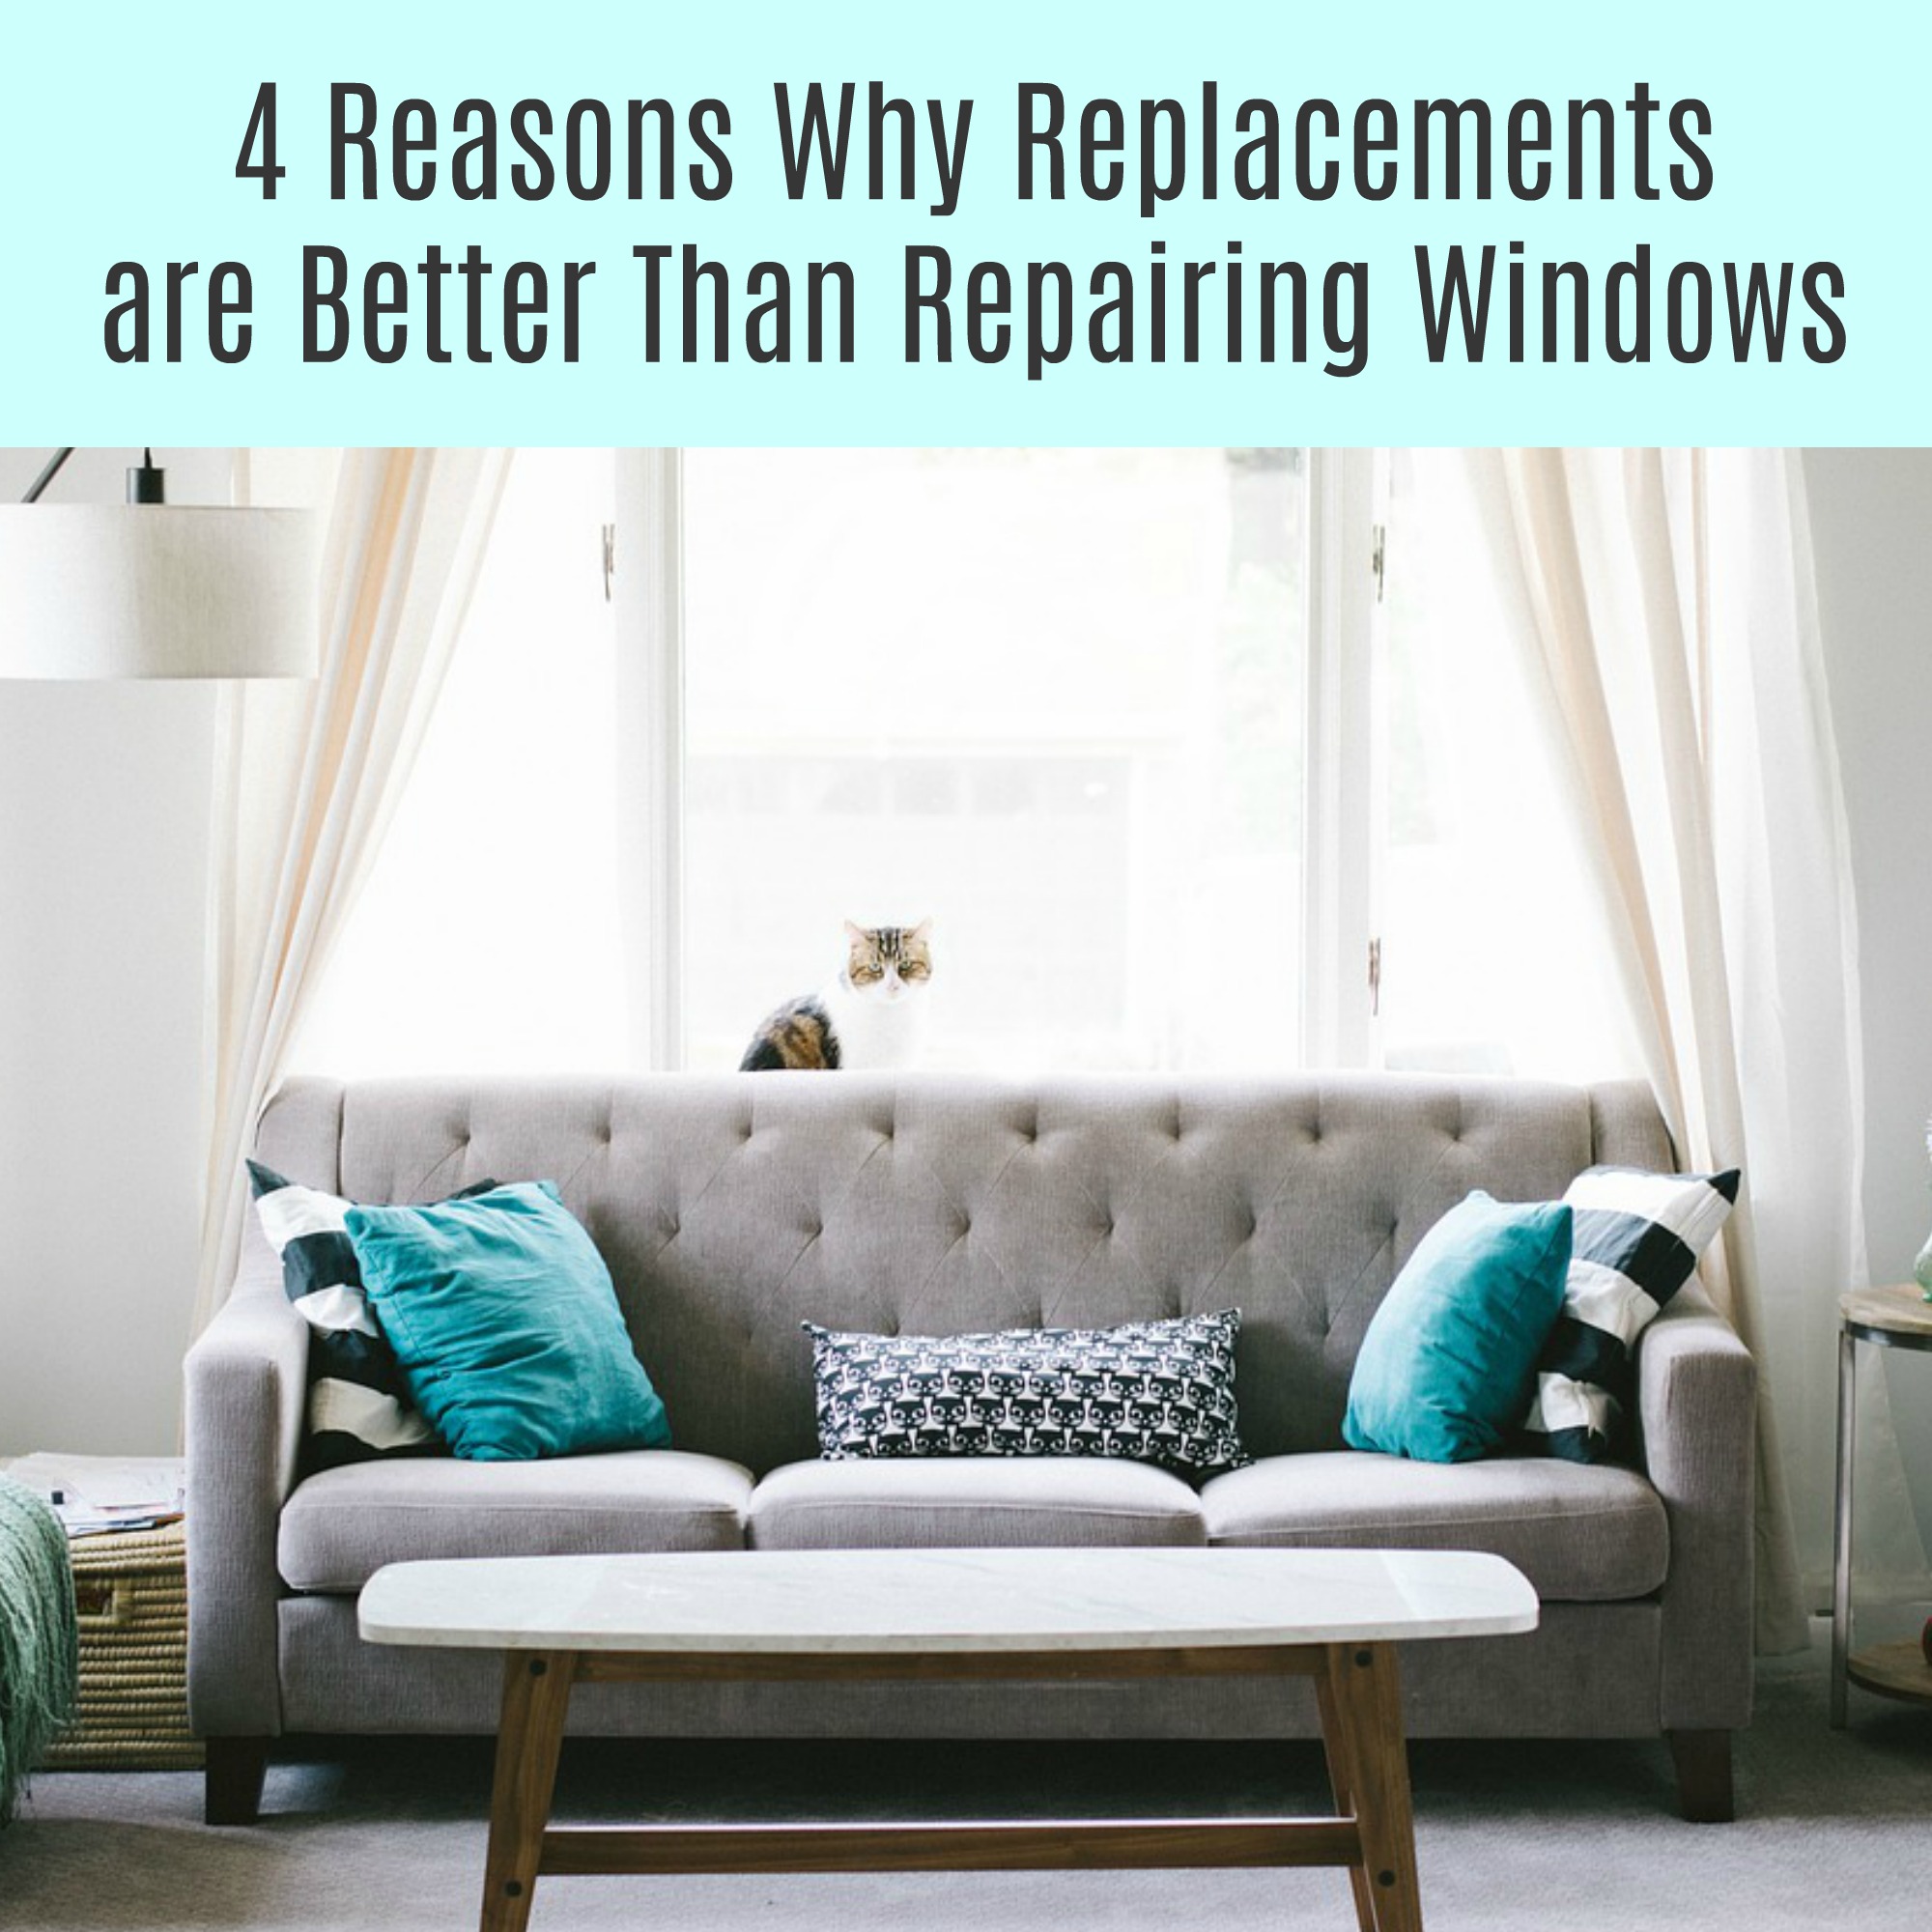 4 Reasons Why Replacements are Better Than Repairing Windows